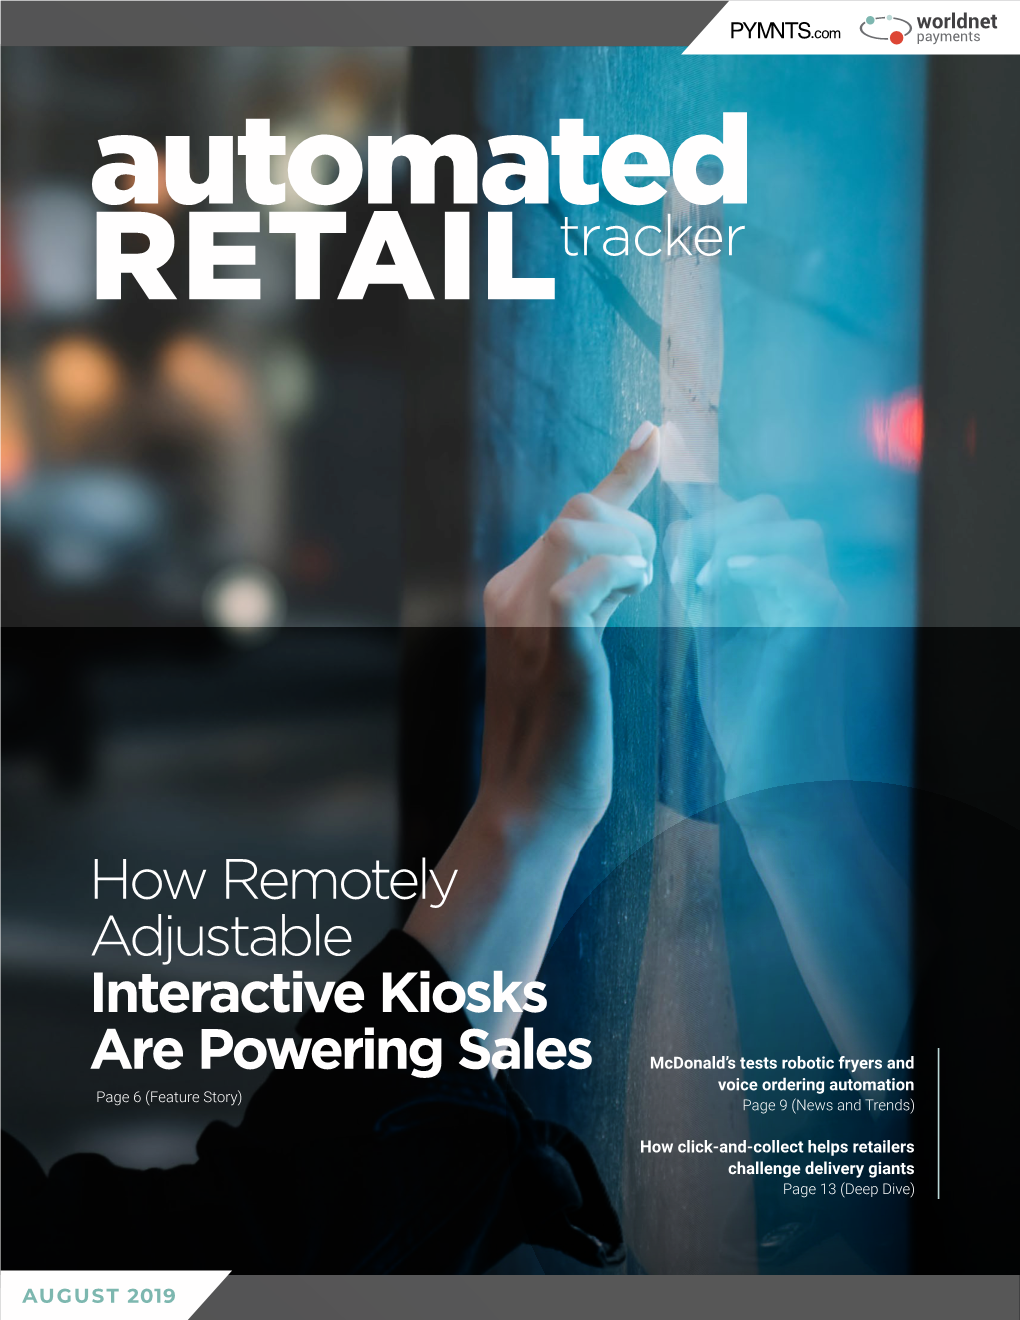 How Remotely Adjustable Interactive Kiosks Are Powering Sales